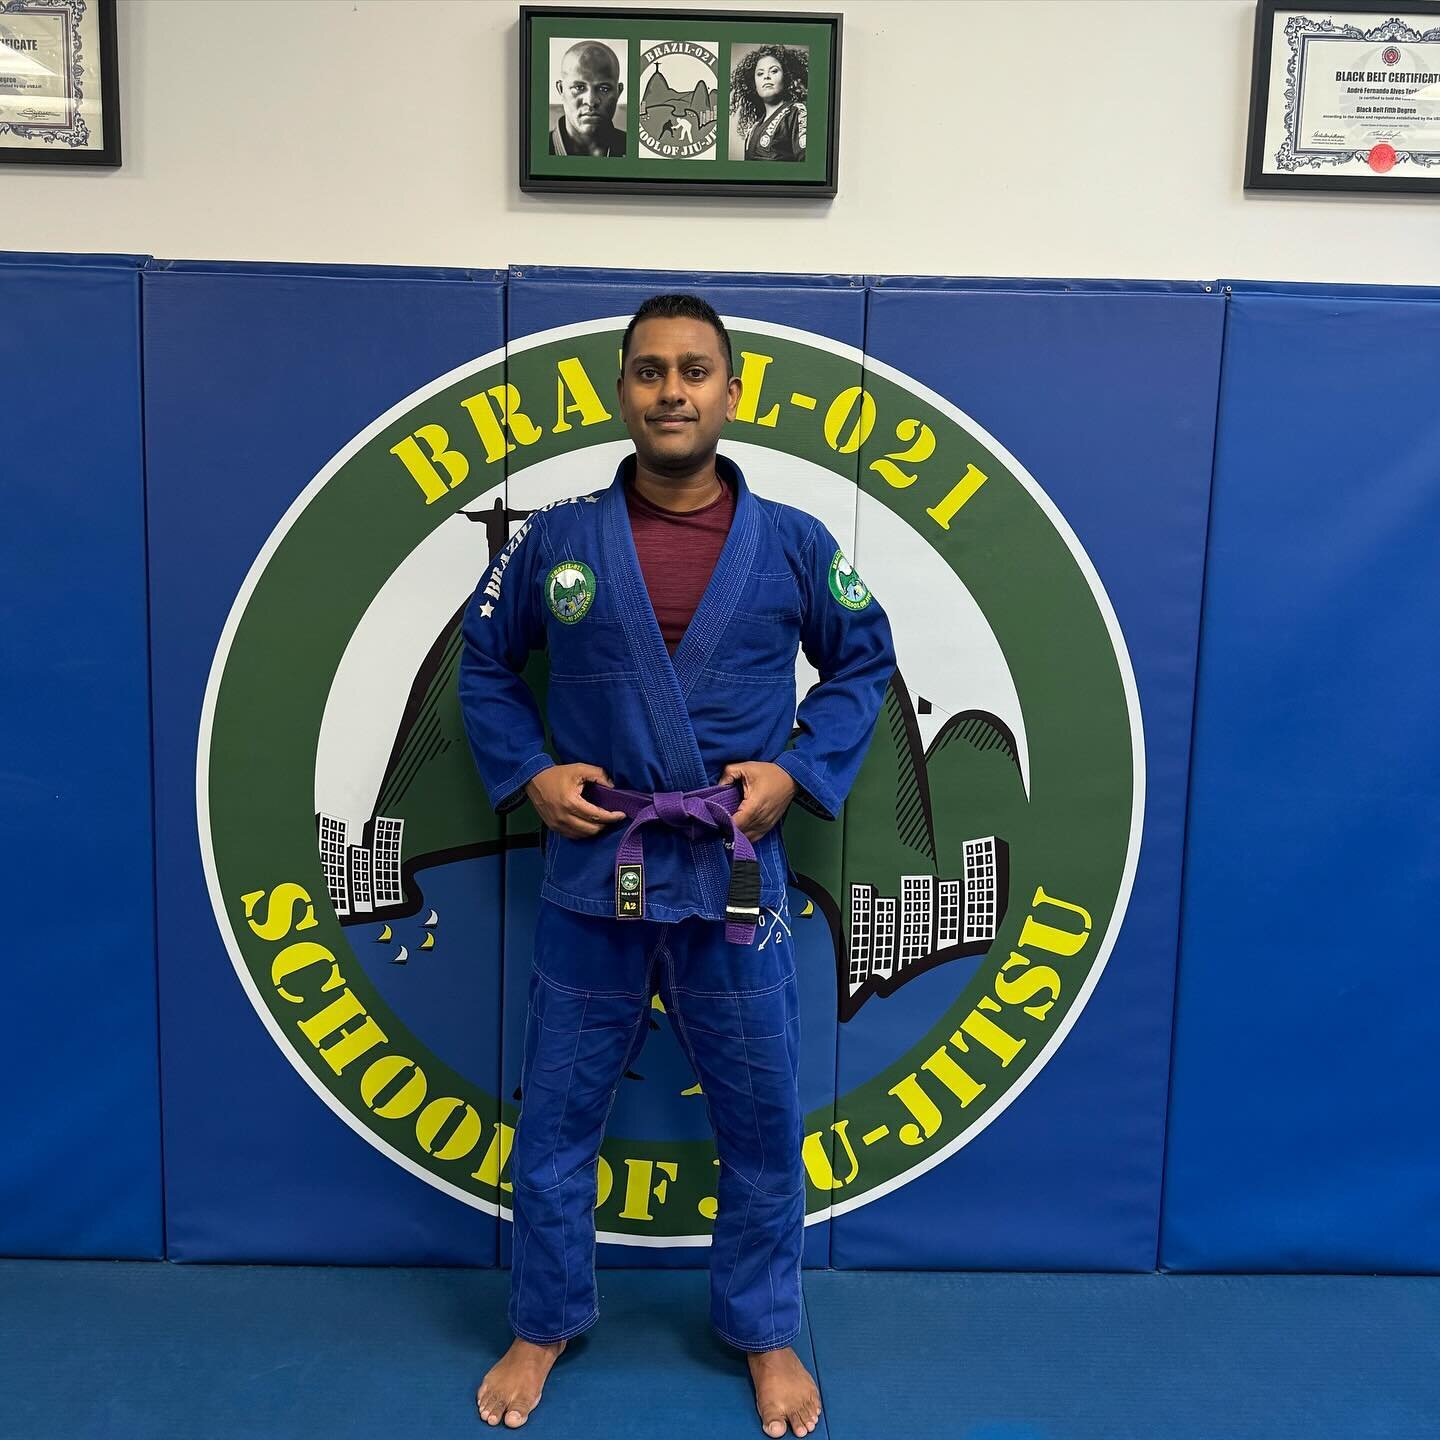 Happy birthday to our long time student Ilango !!! 

#hapybirthday #bjj #brazil021chicago